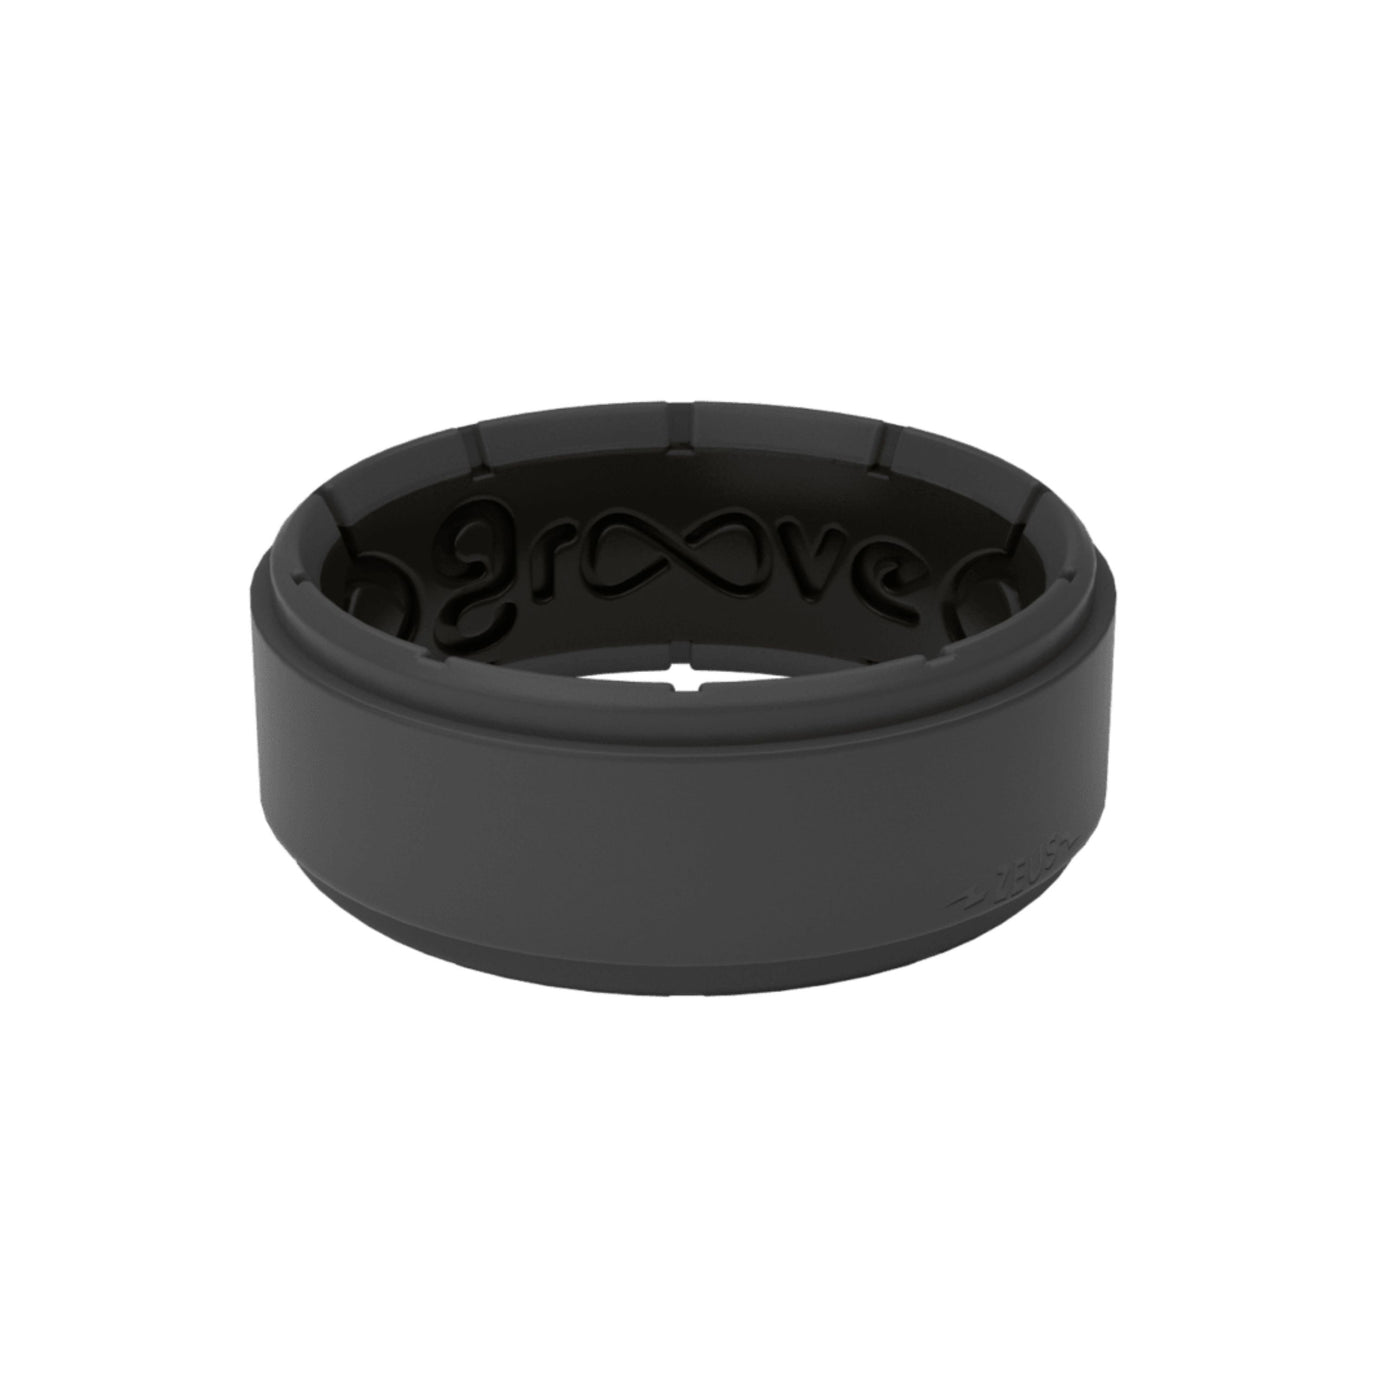 Mens "Deep Stone" Silicone Ring